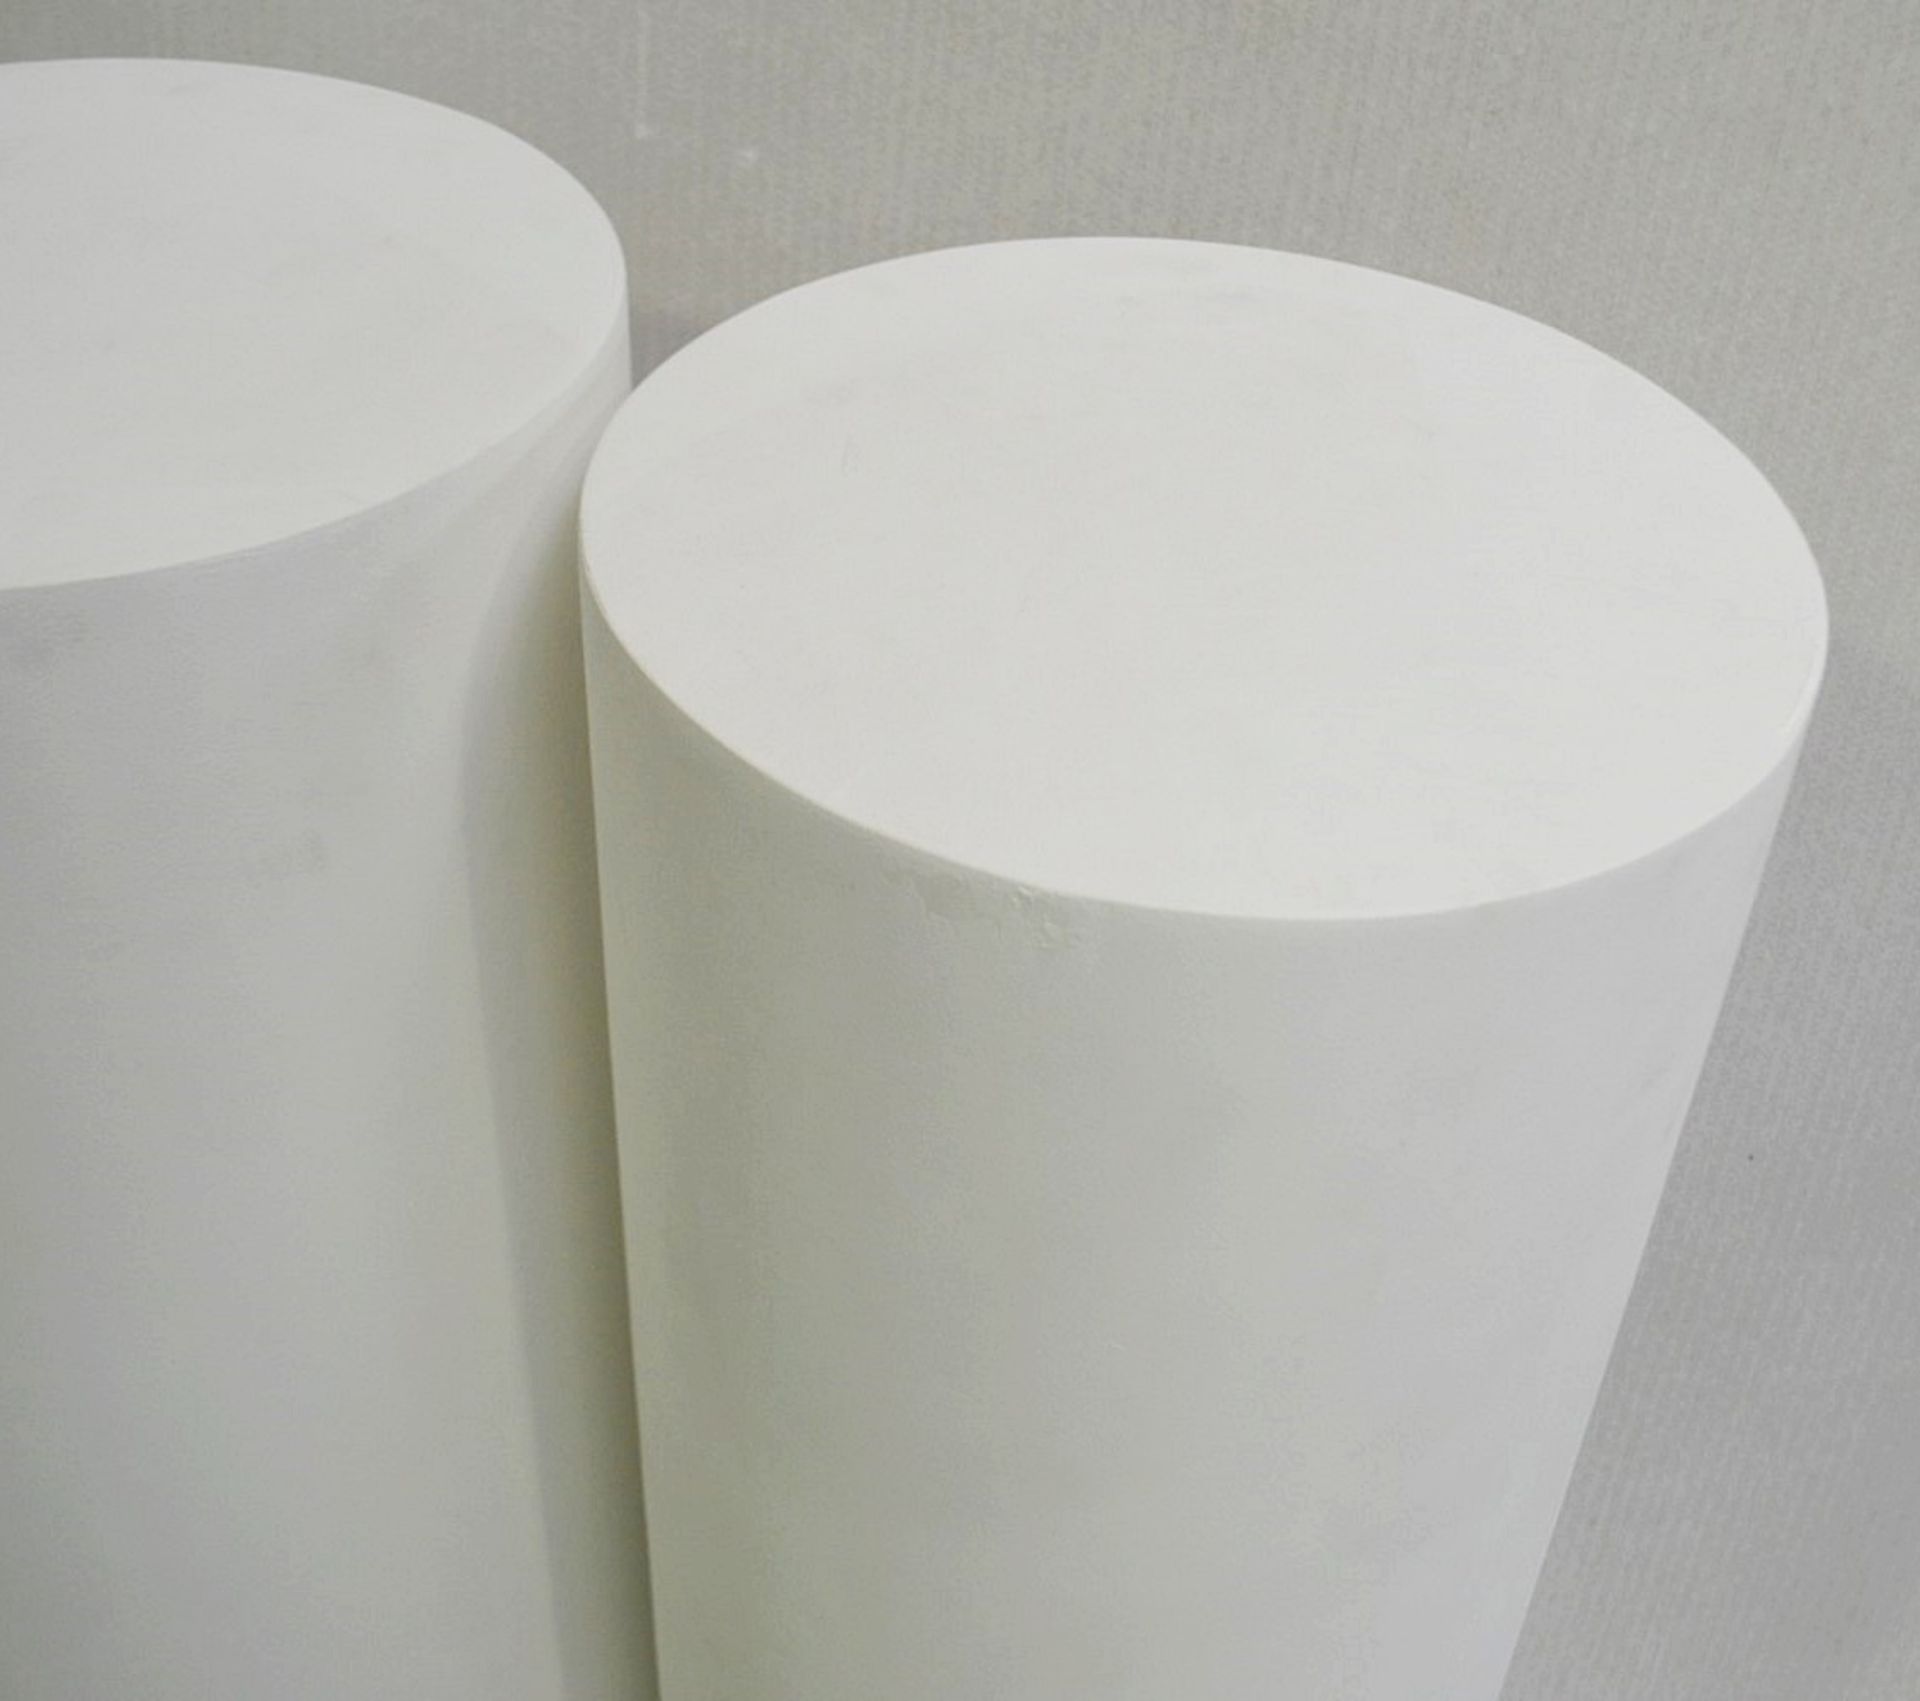 Set Of 3 x Cylinder 1-Metre Tall Retail Shop Display Plinths - Dimensions: Height 100cm / ø 36cm - Image 3 of 5